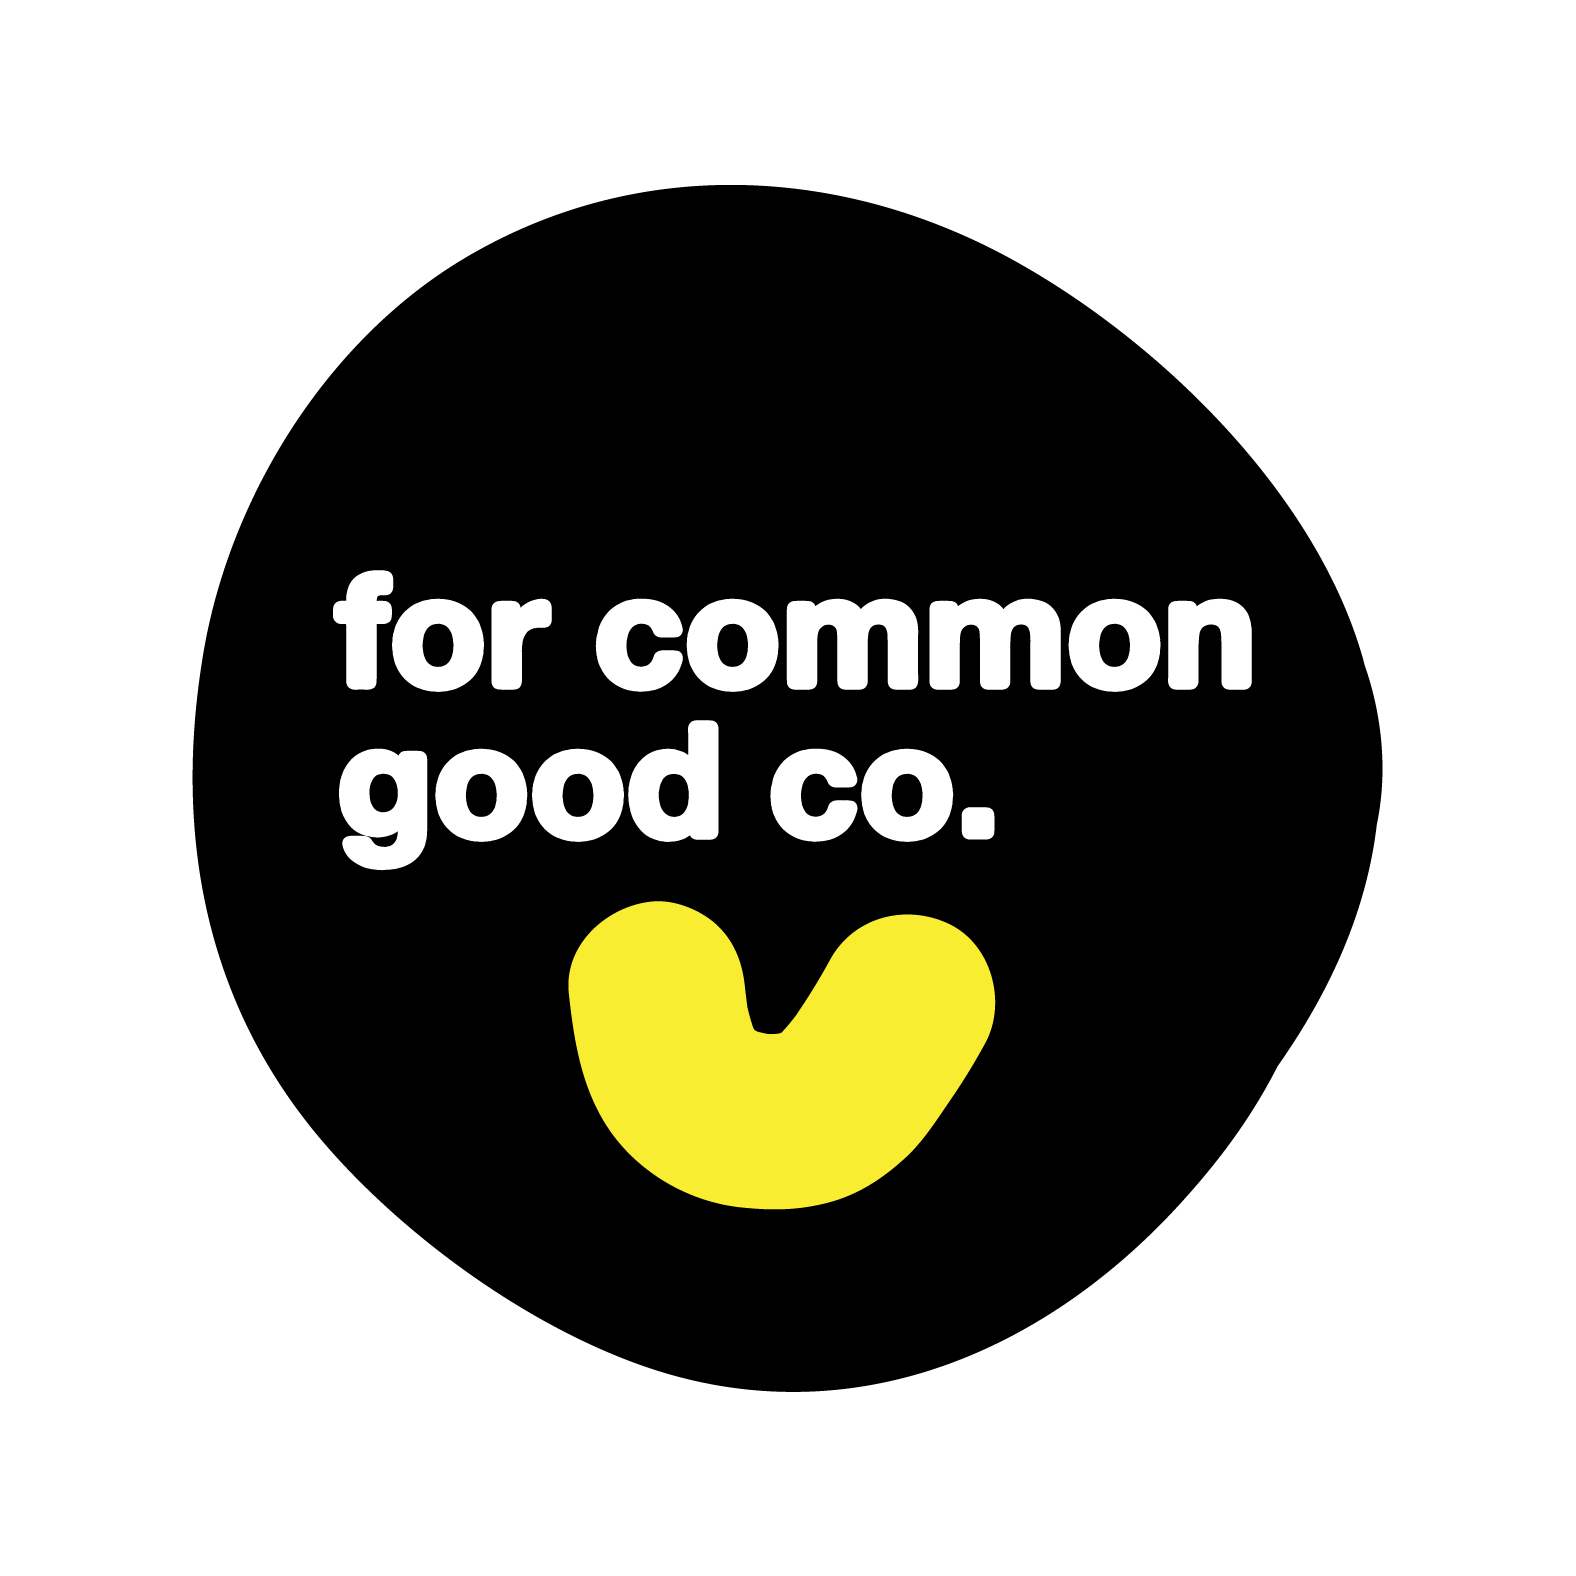 Forcommongood.co